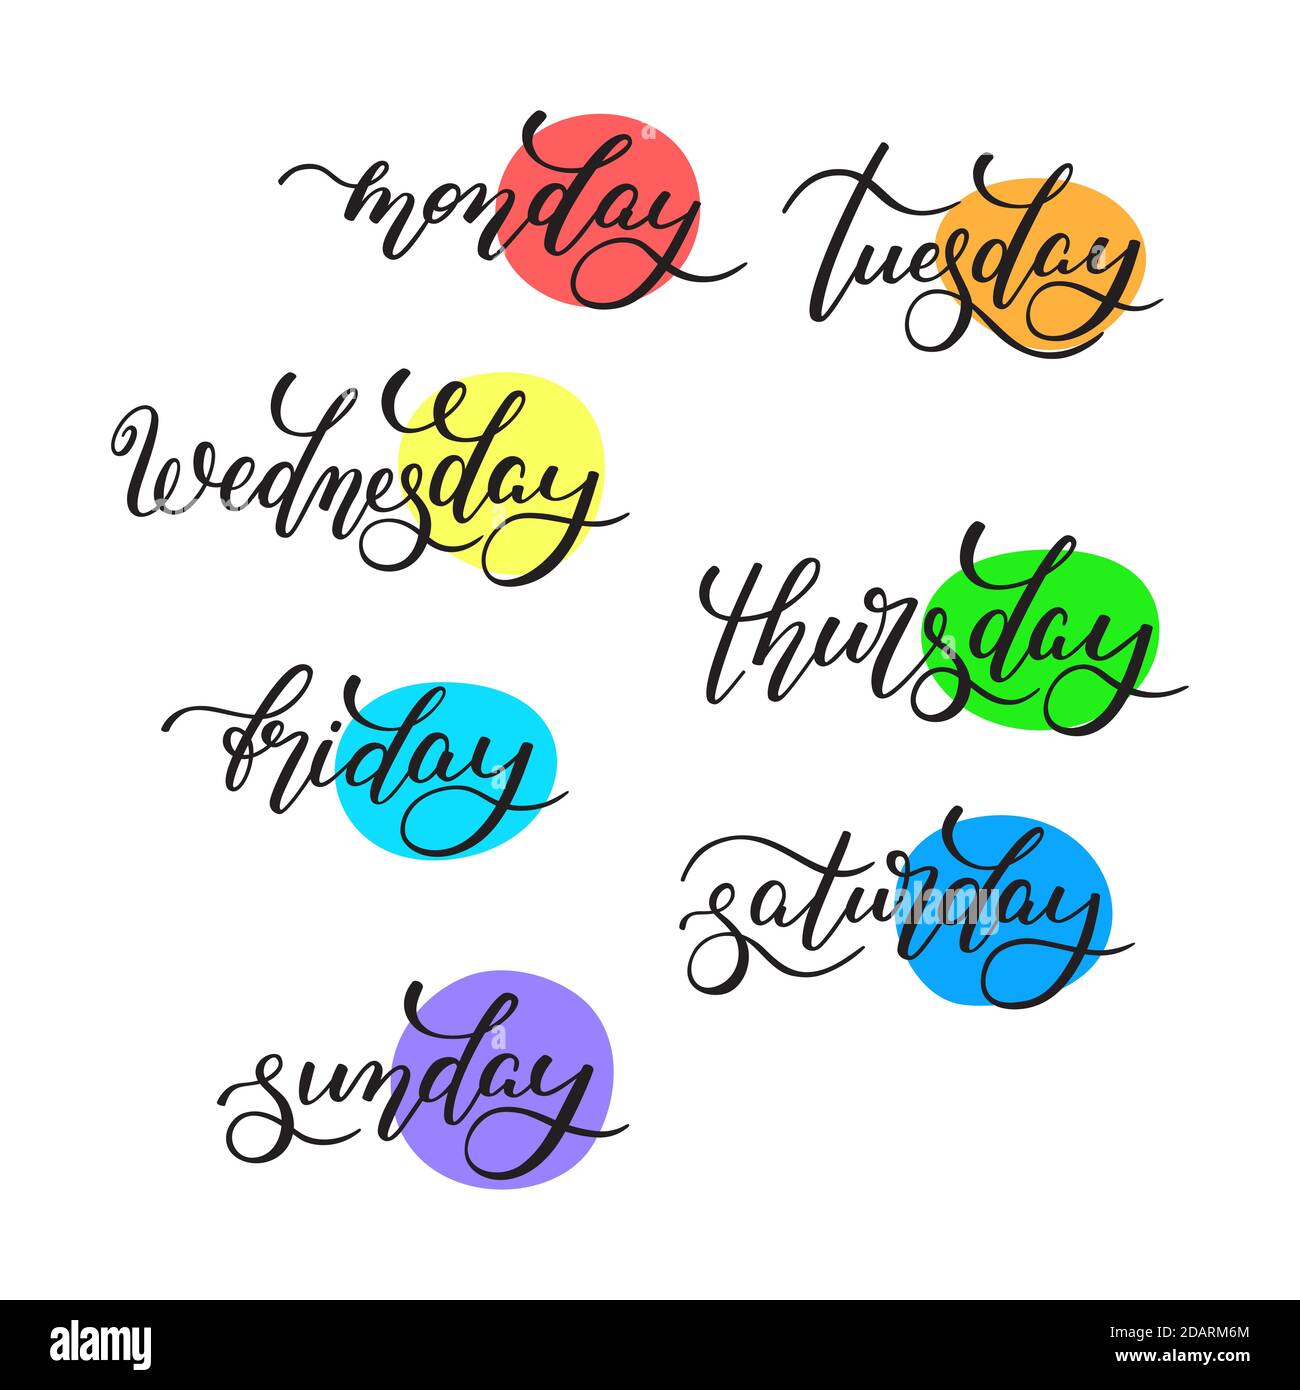 Paper Drawn Weekdays Seven Days Lettering Stock Vector (Royalty Free)  465047636